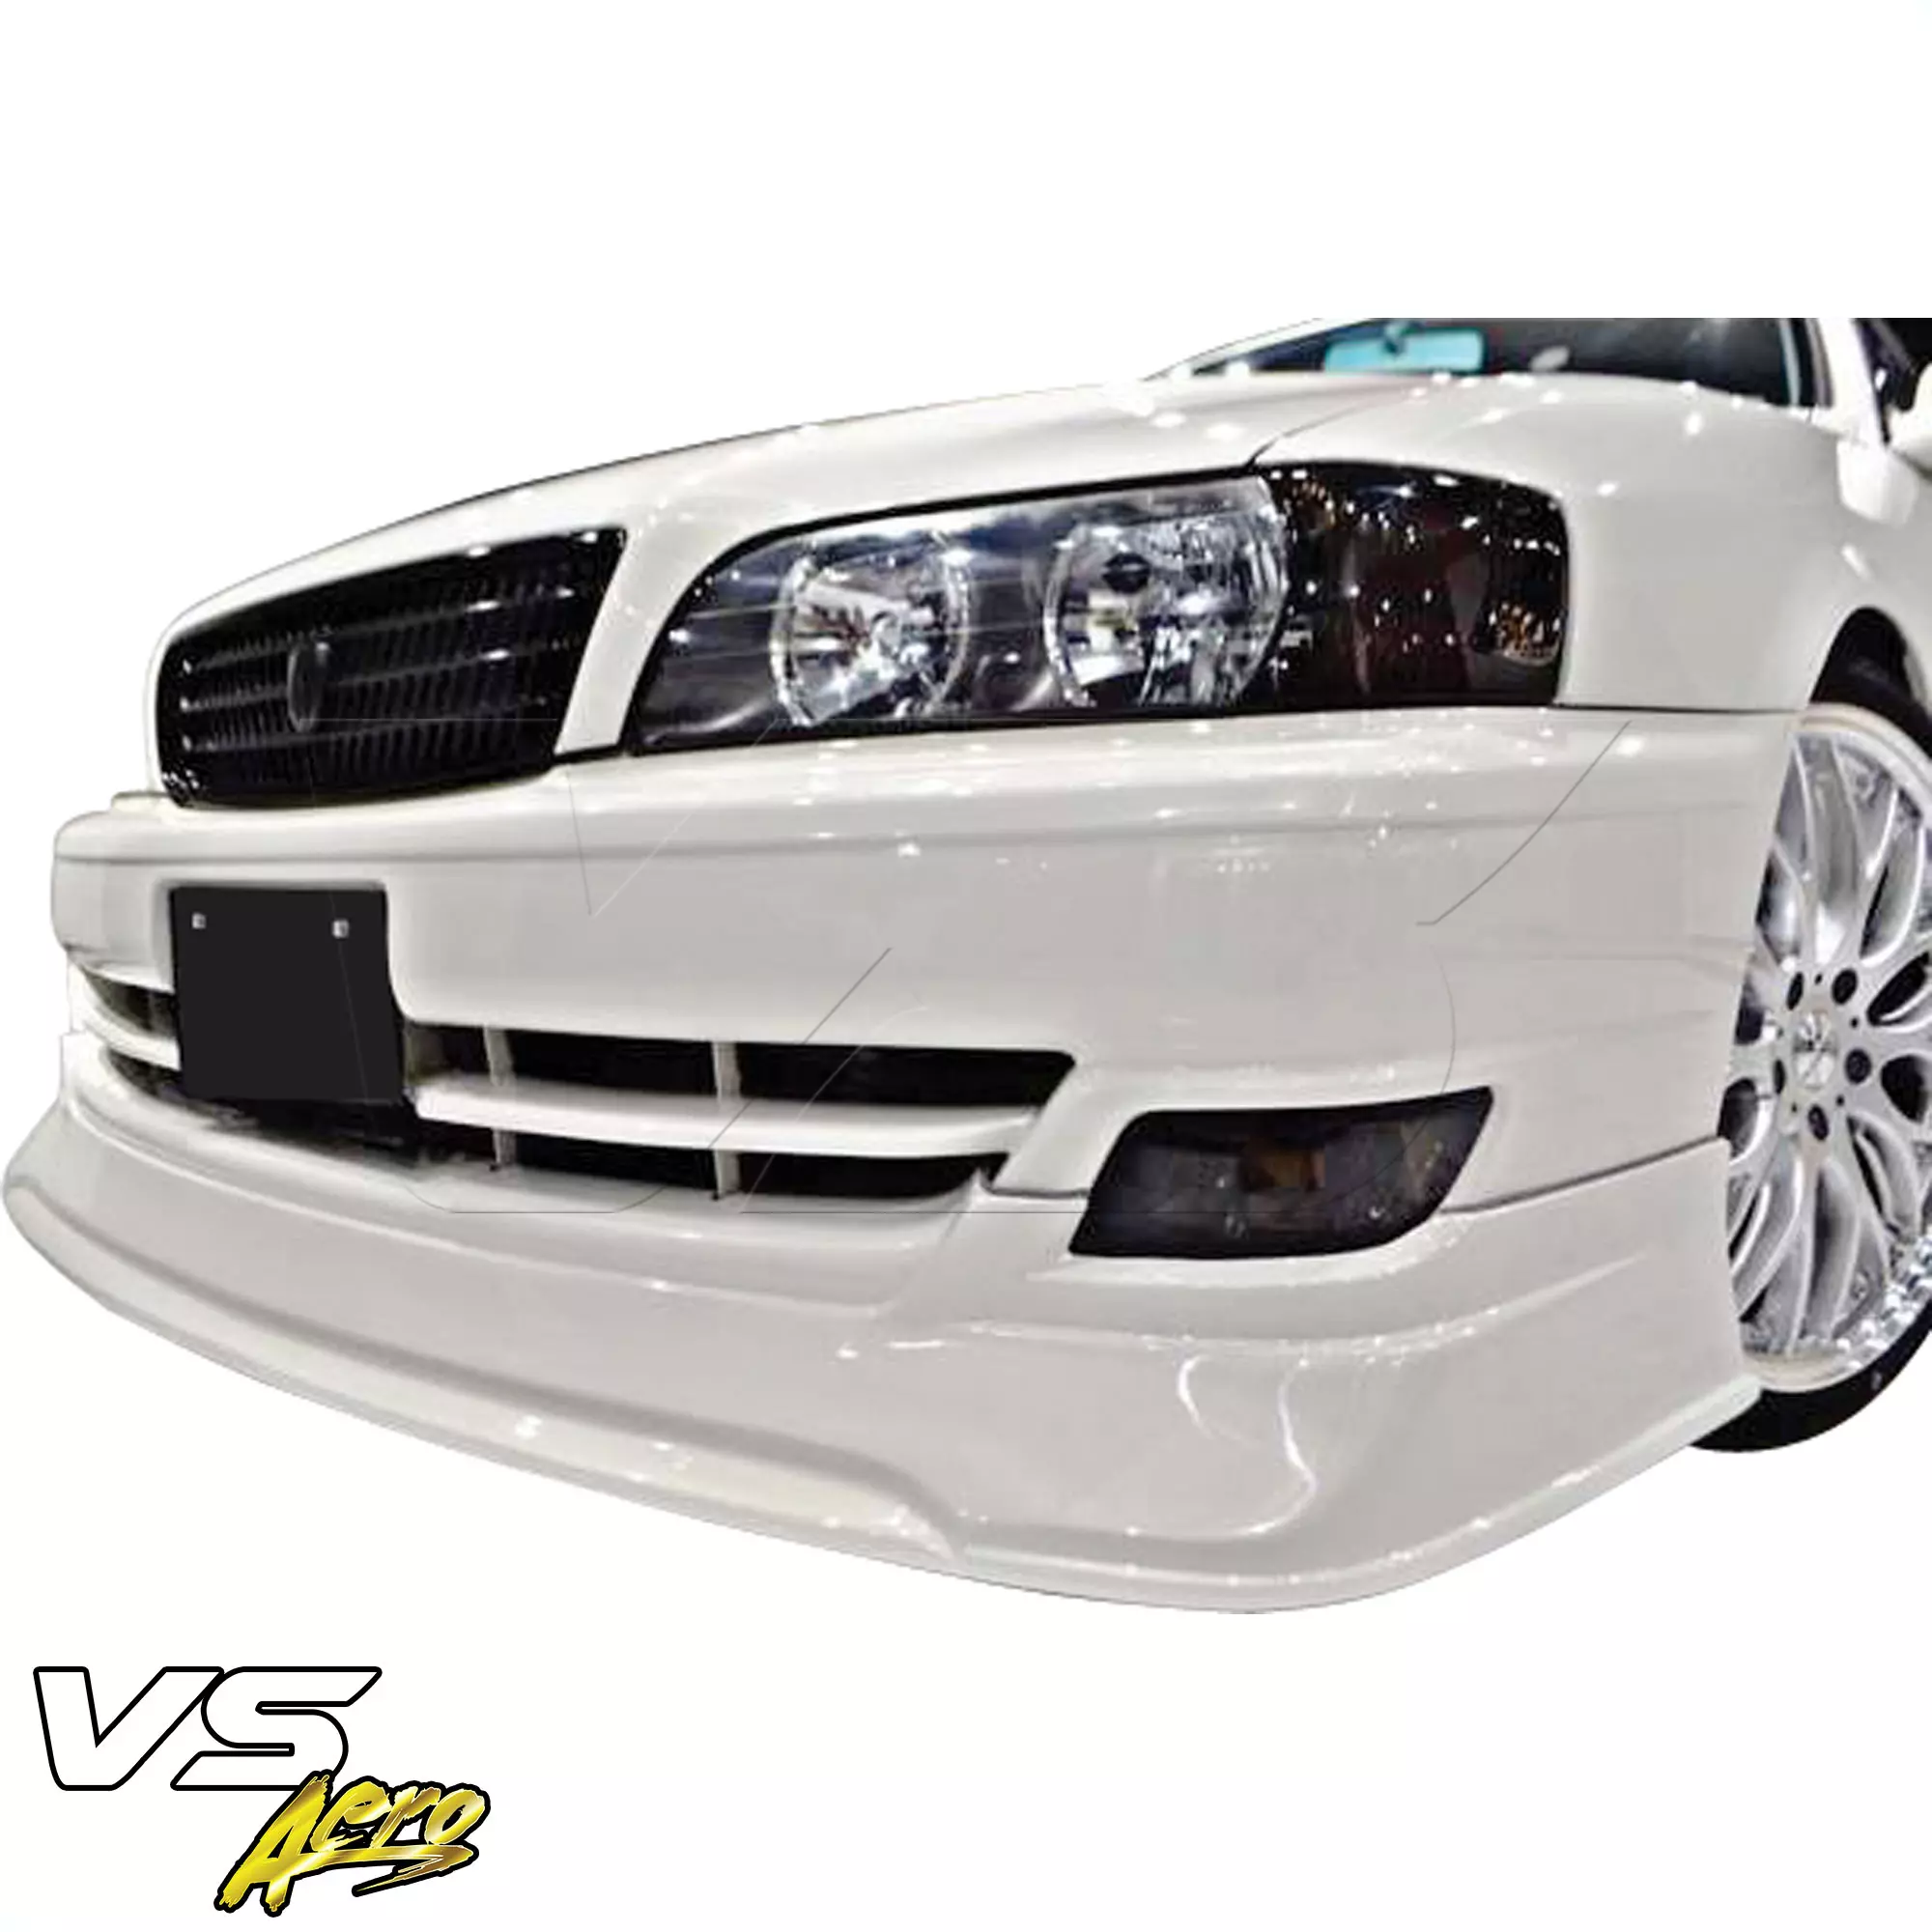 VSaero FRP TRAU Late Front Lip Valance > Toyota Chaser JZX100 1999-2000 - Image 26